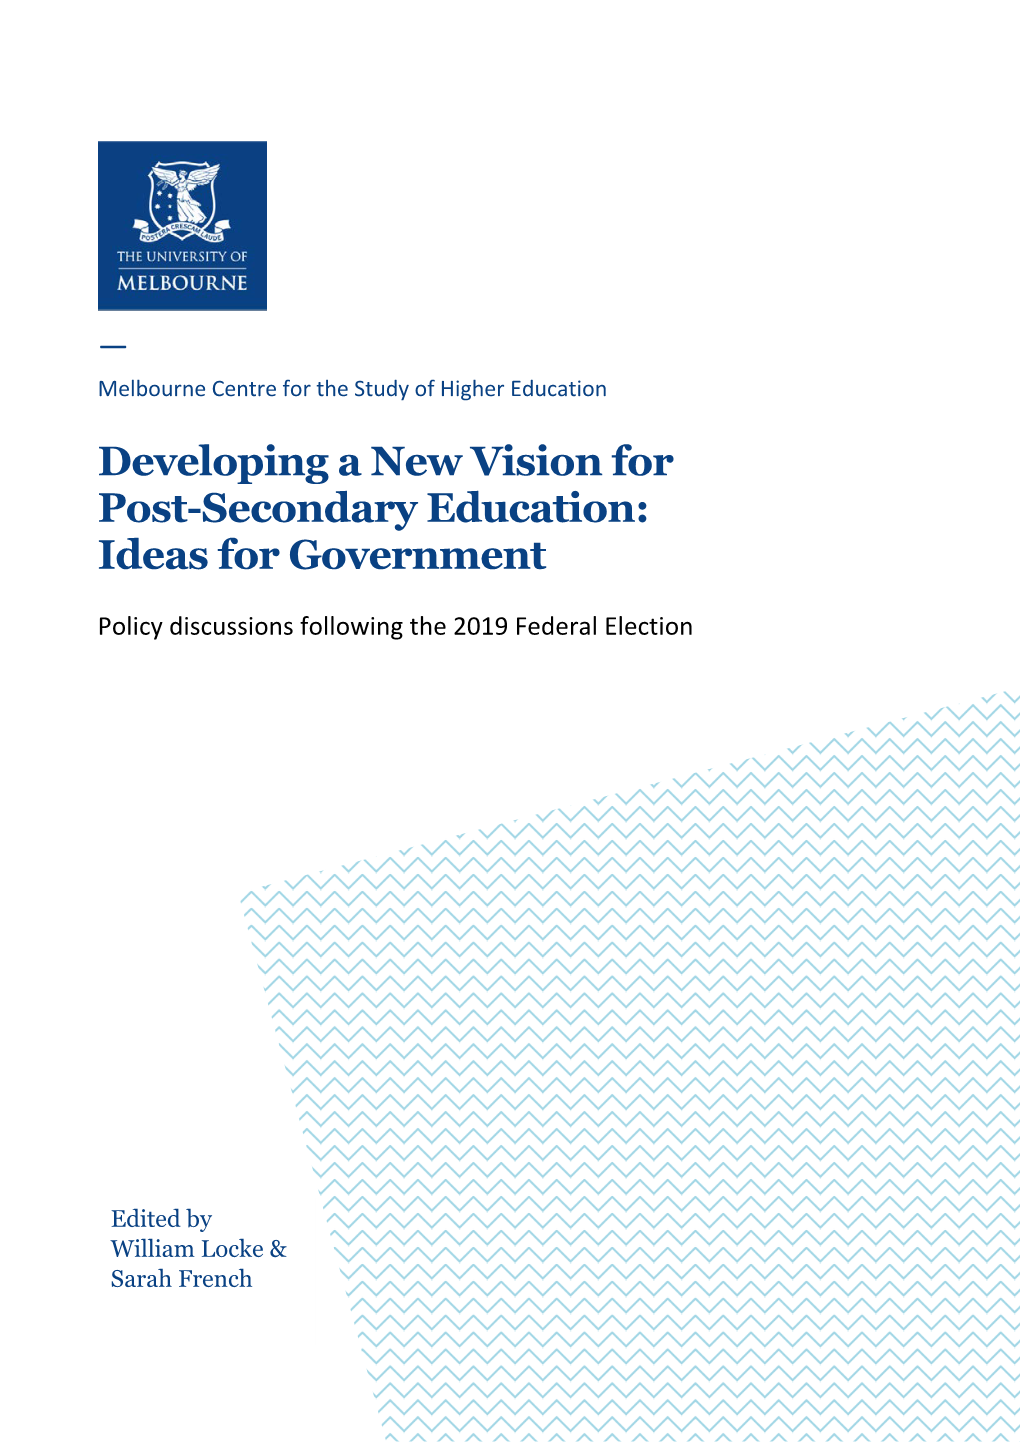 Developing a New Vision for Post-Secondary Education: Ideas for Government